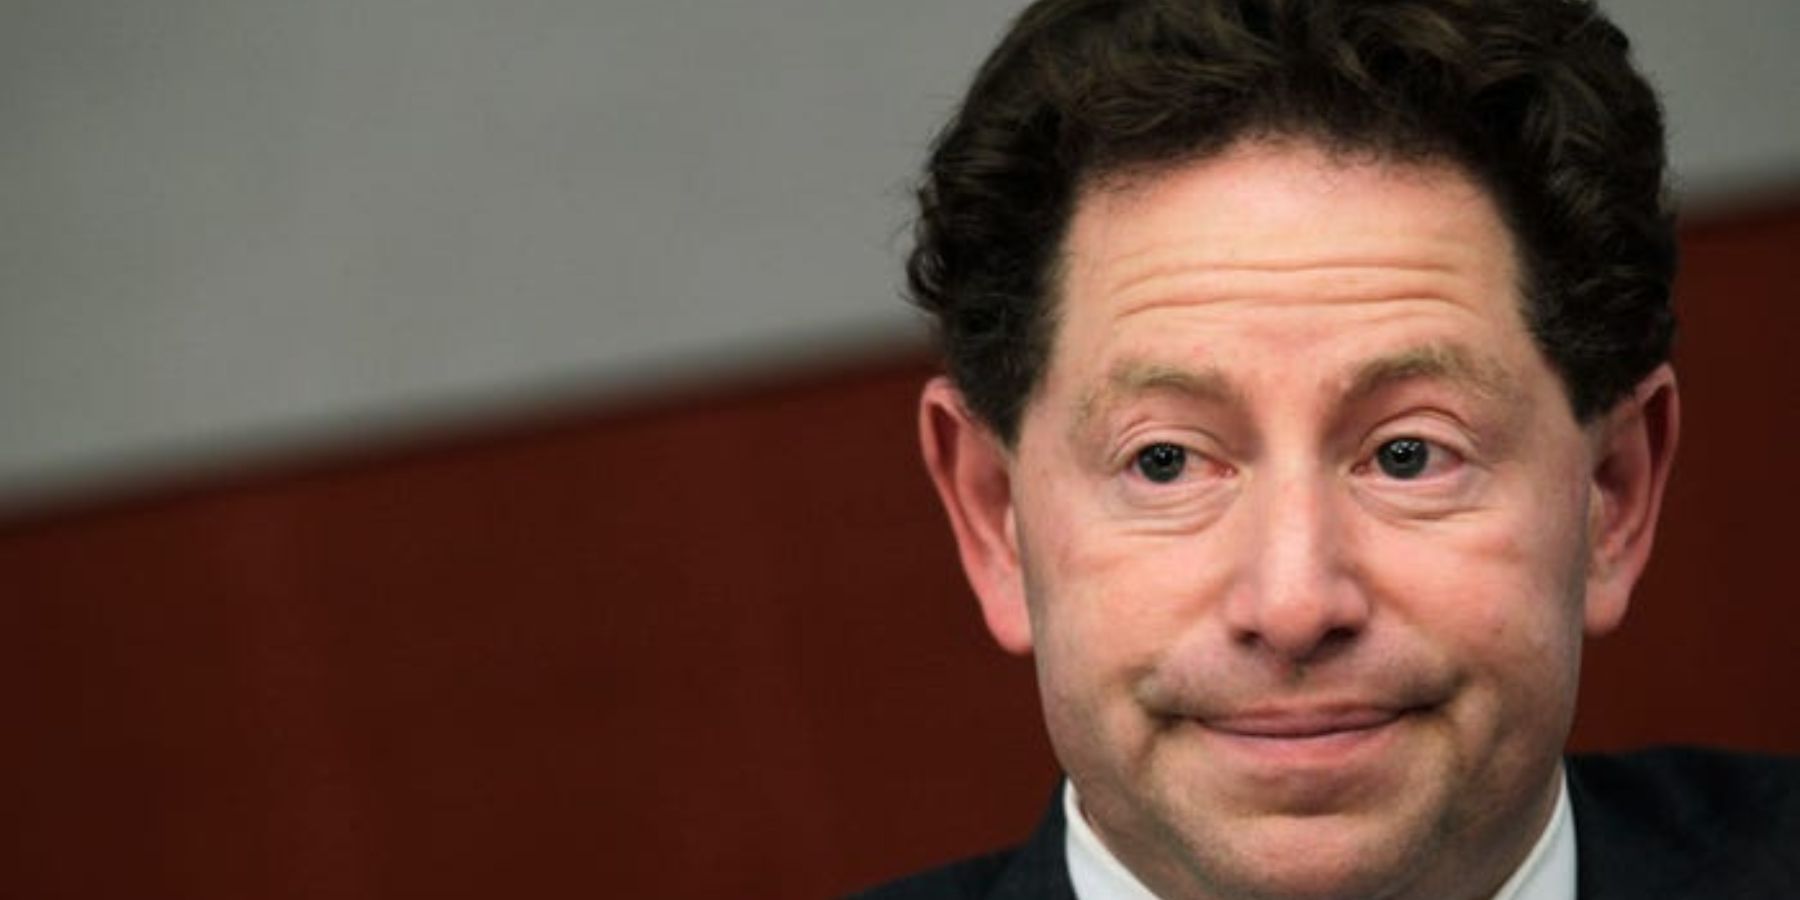 Bobby Kotick Will Likely Leave Once Microsoft Finishes Acquiring Activision Blizzard